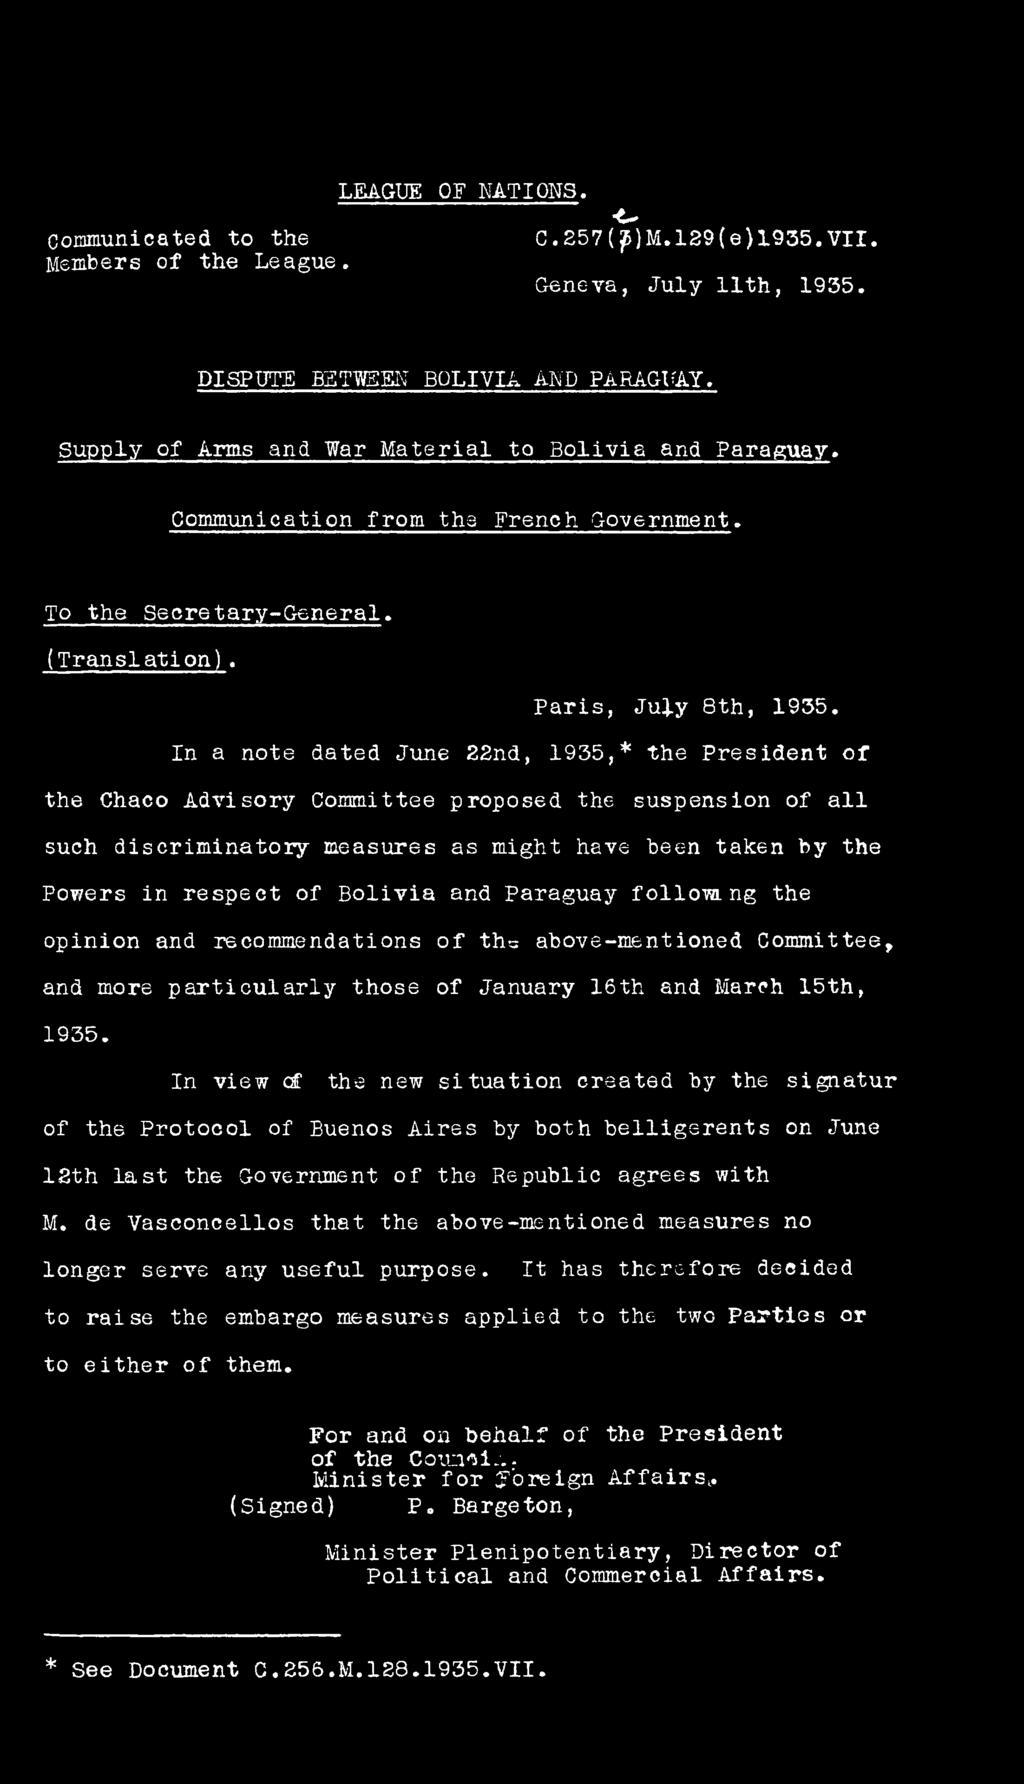 In a note dated June 22nd, 1935,* the President of the Chaco Advisory Committee proposed the suspension of all such discriminatory measures as might have been taken by the Powers in respect of